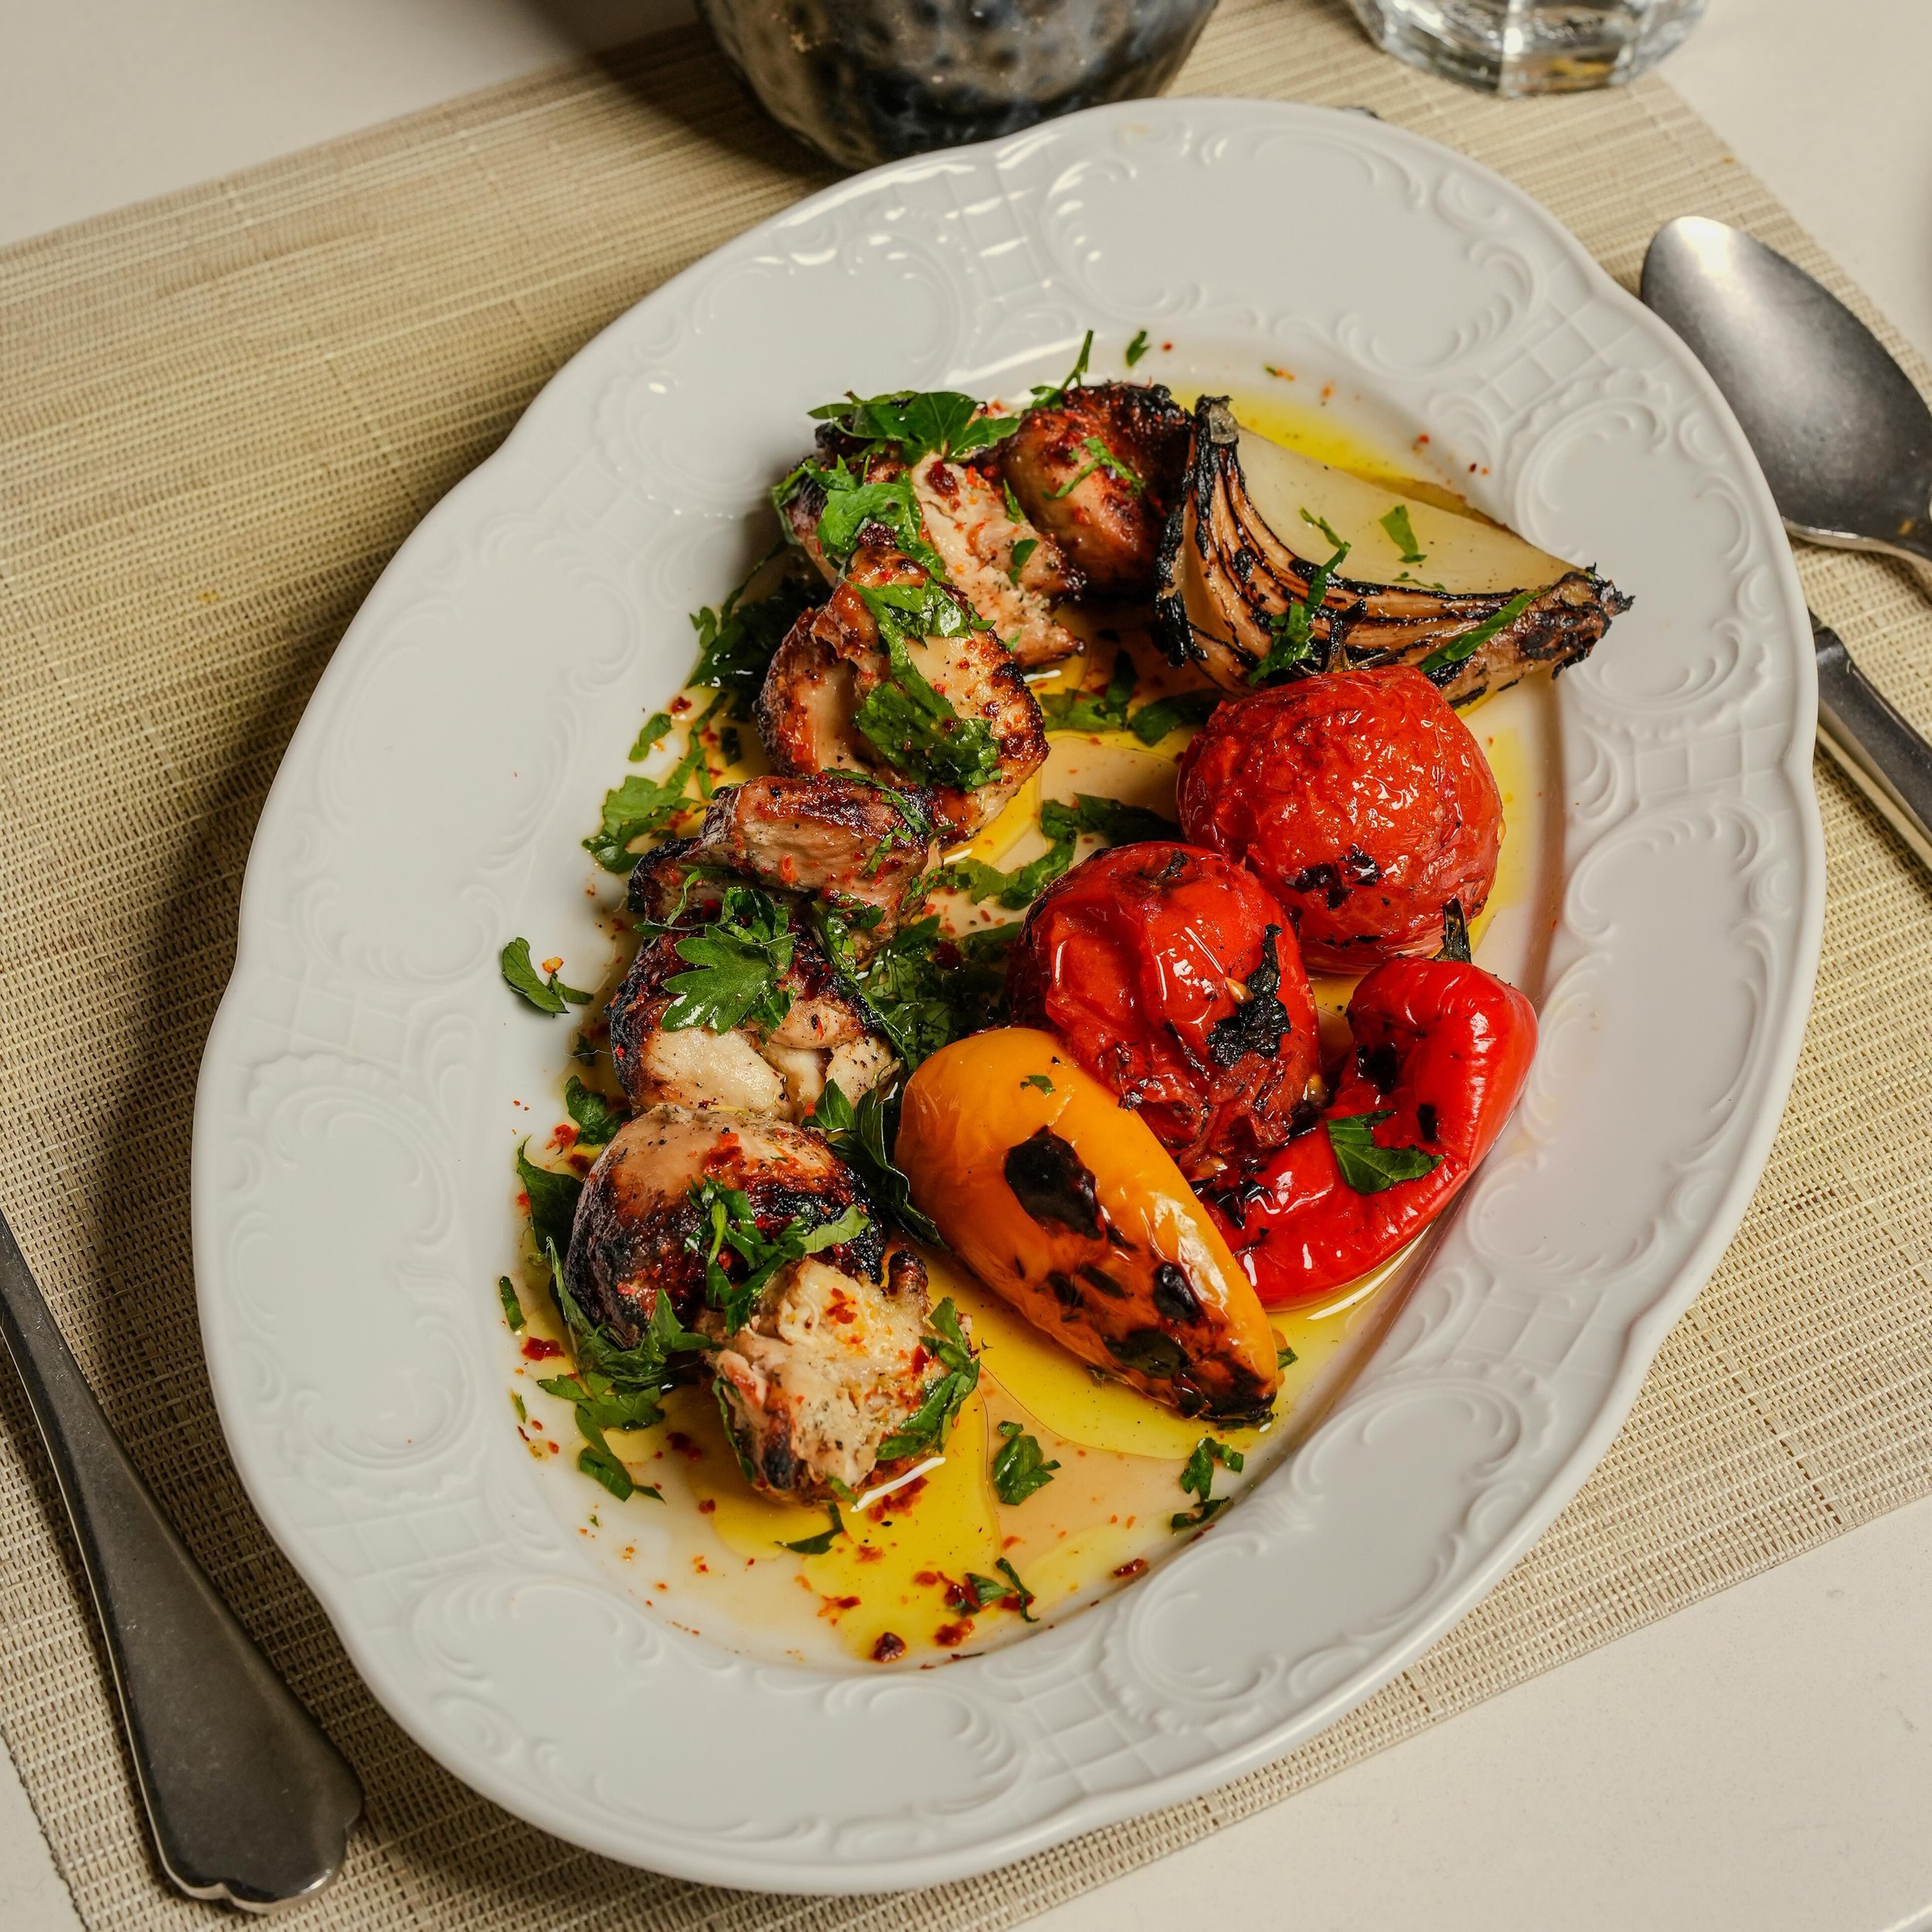 This brunch favorite is on special on our menu for lunch this week! Shish Taouk &mdash; Yogurt-marinated chicken kebab served with garlic toum and charred onions, tomatoes, and peppers